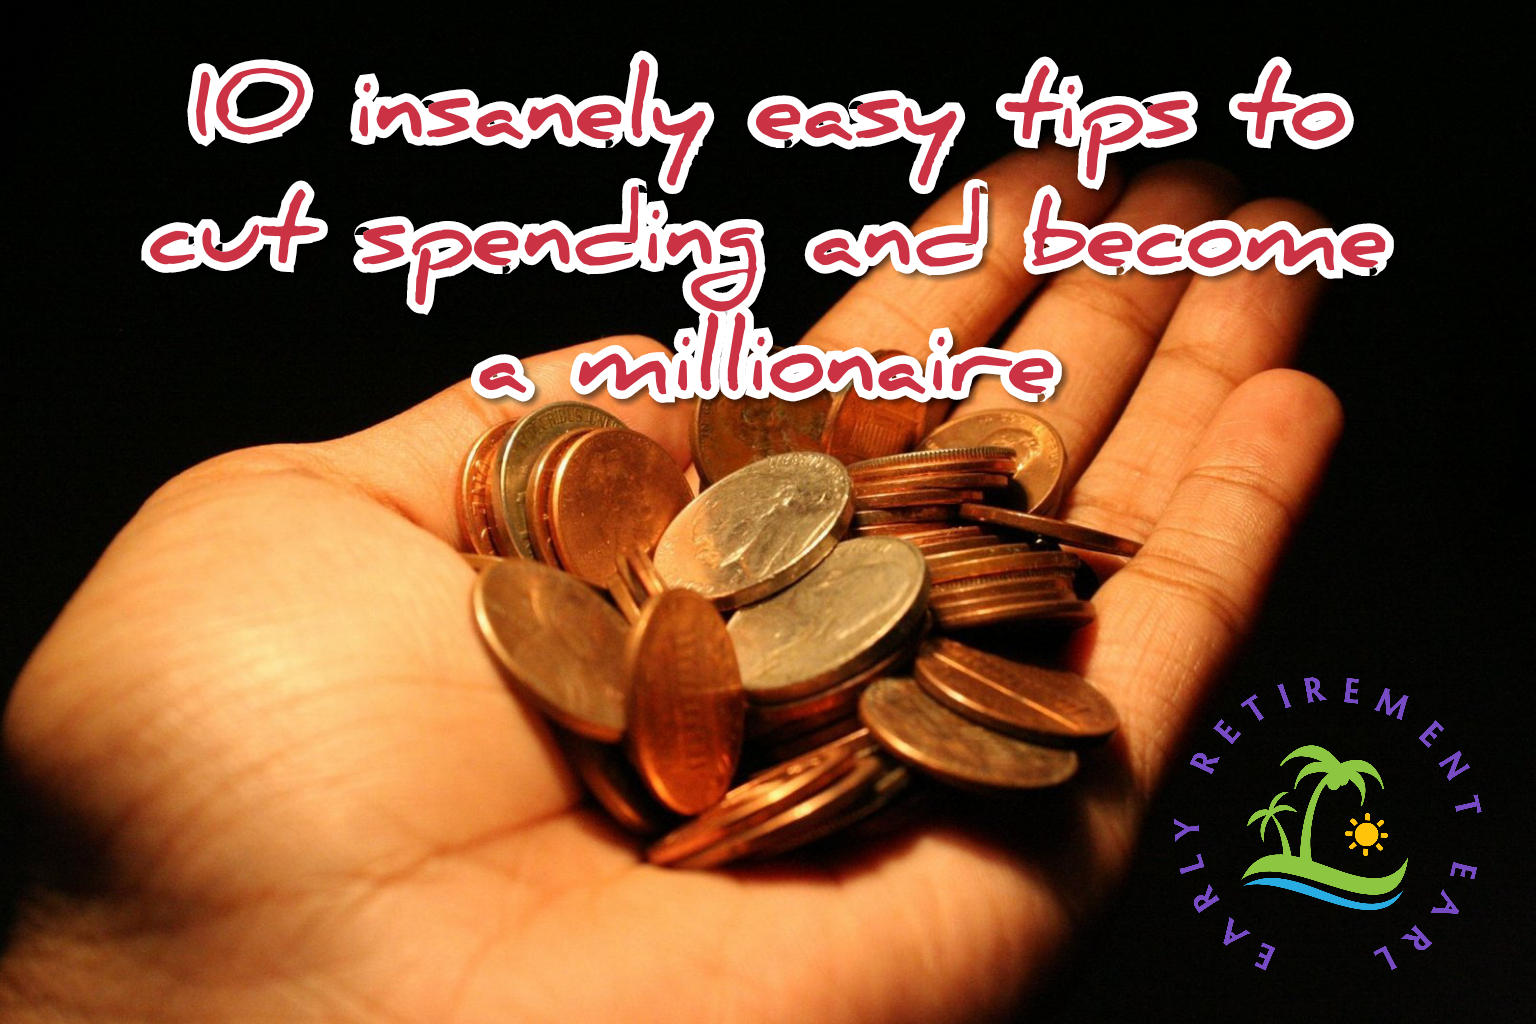 10 insanely easy ways to cut spending and become a millionaire by 45